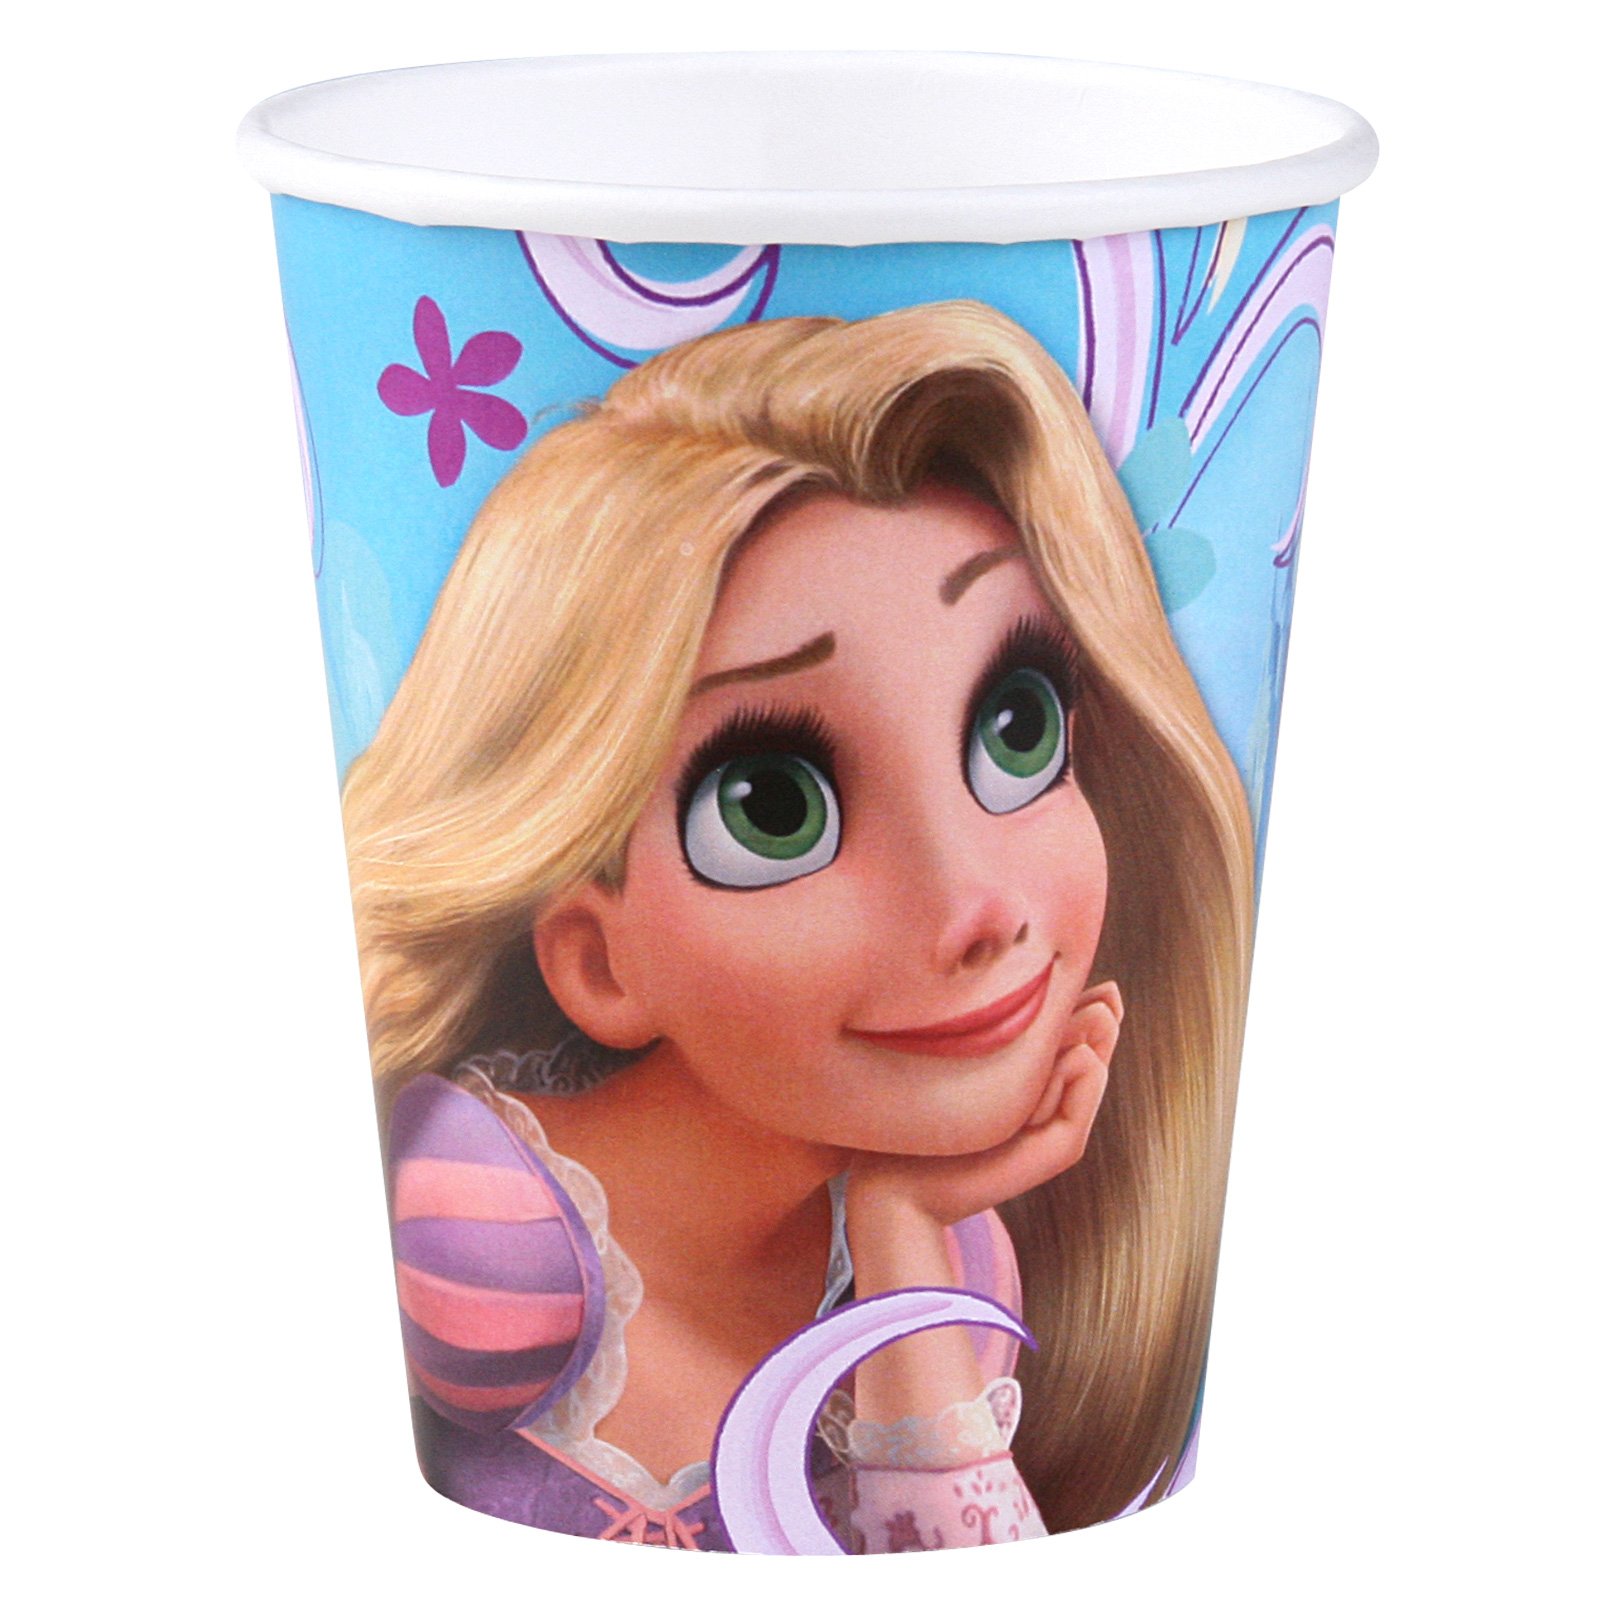 Disney's Tangled 9 oz. Cups (8 count)